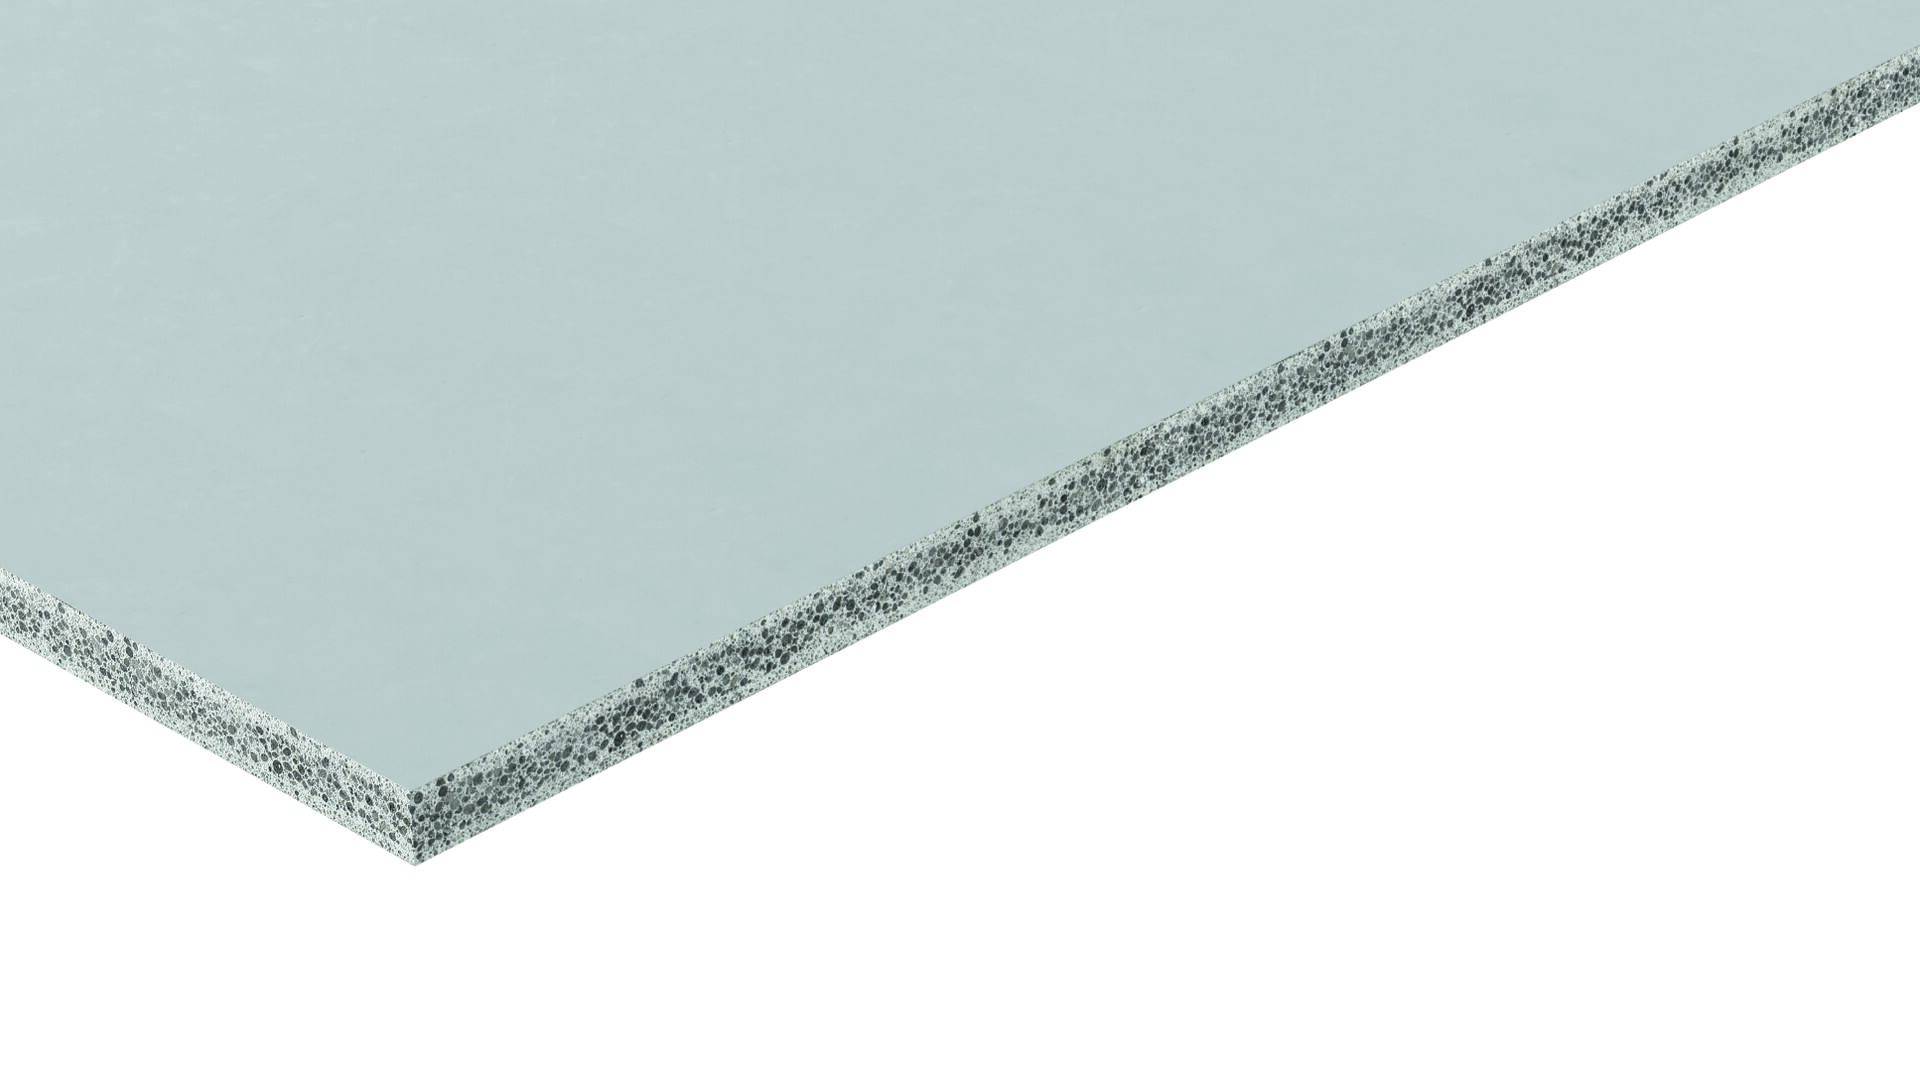 fermacell® 3WS01-H₂O Adjustable Wall Lining - wall liner with Powerpanel H₂O.